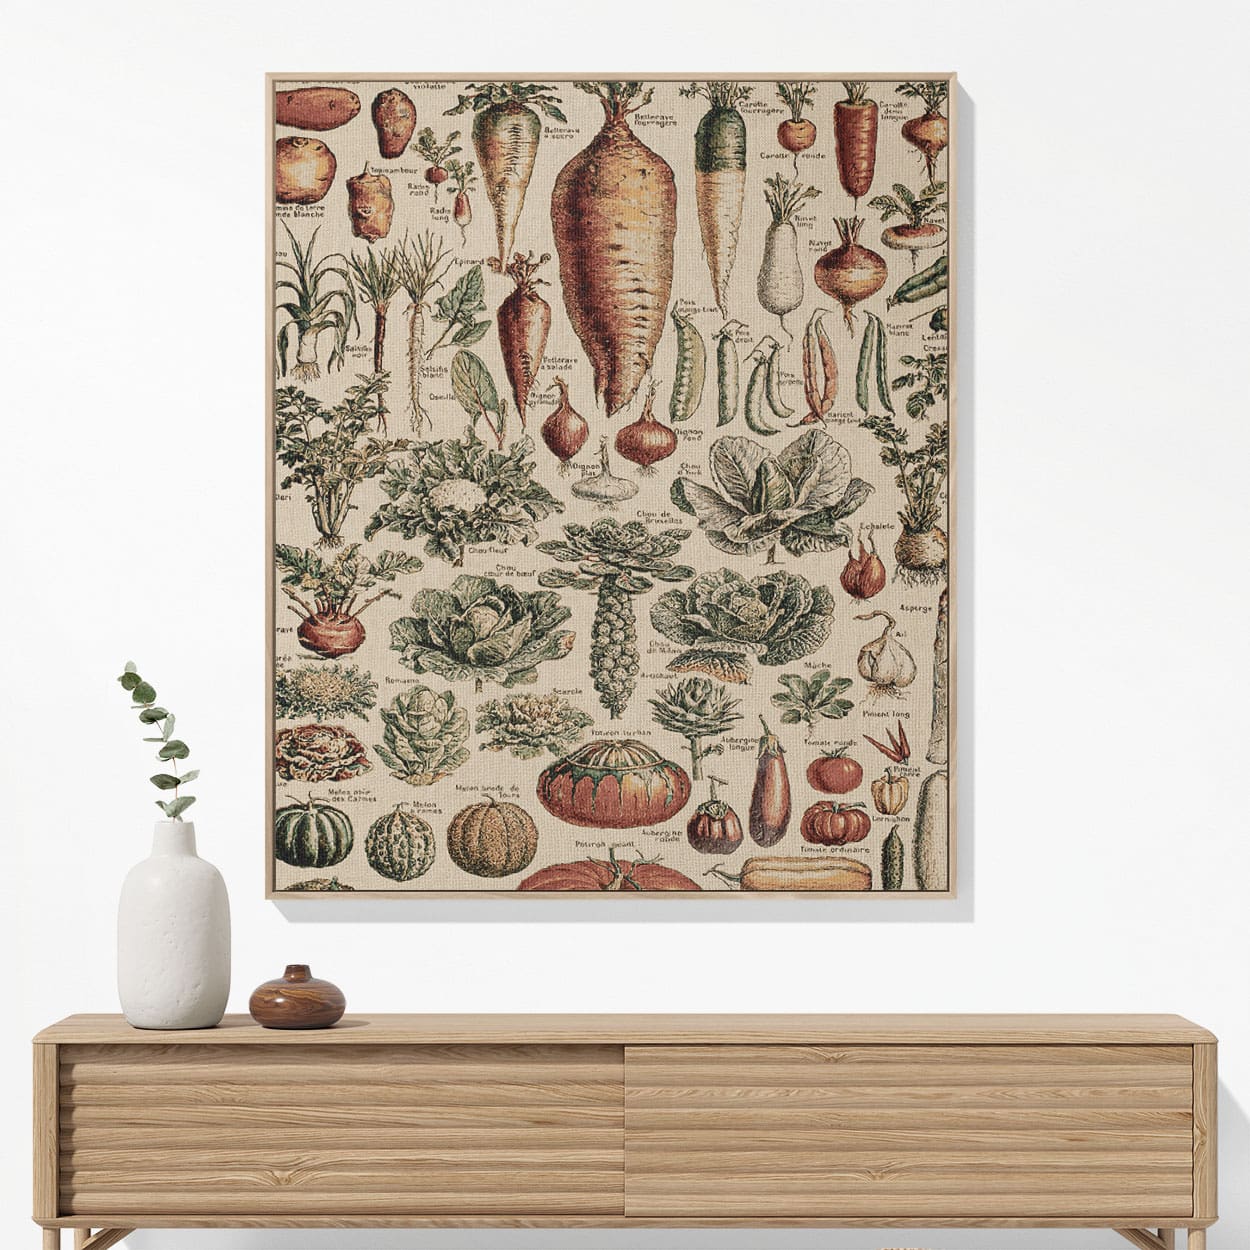 Vegetarian Woven Blanket Woven Blanket Hanging on a Wall as Framed Wall Art